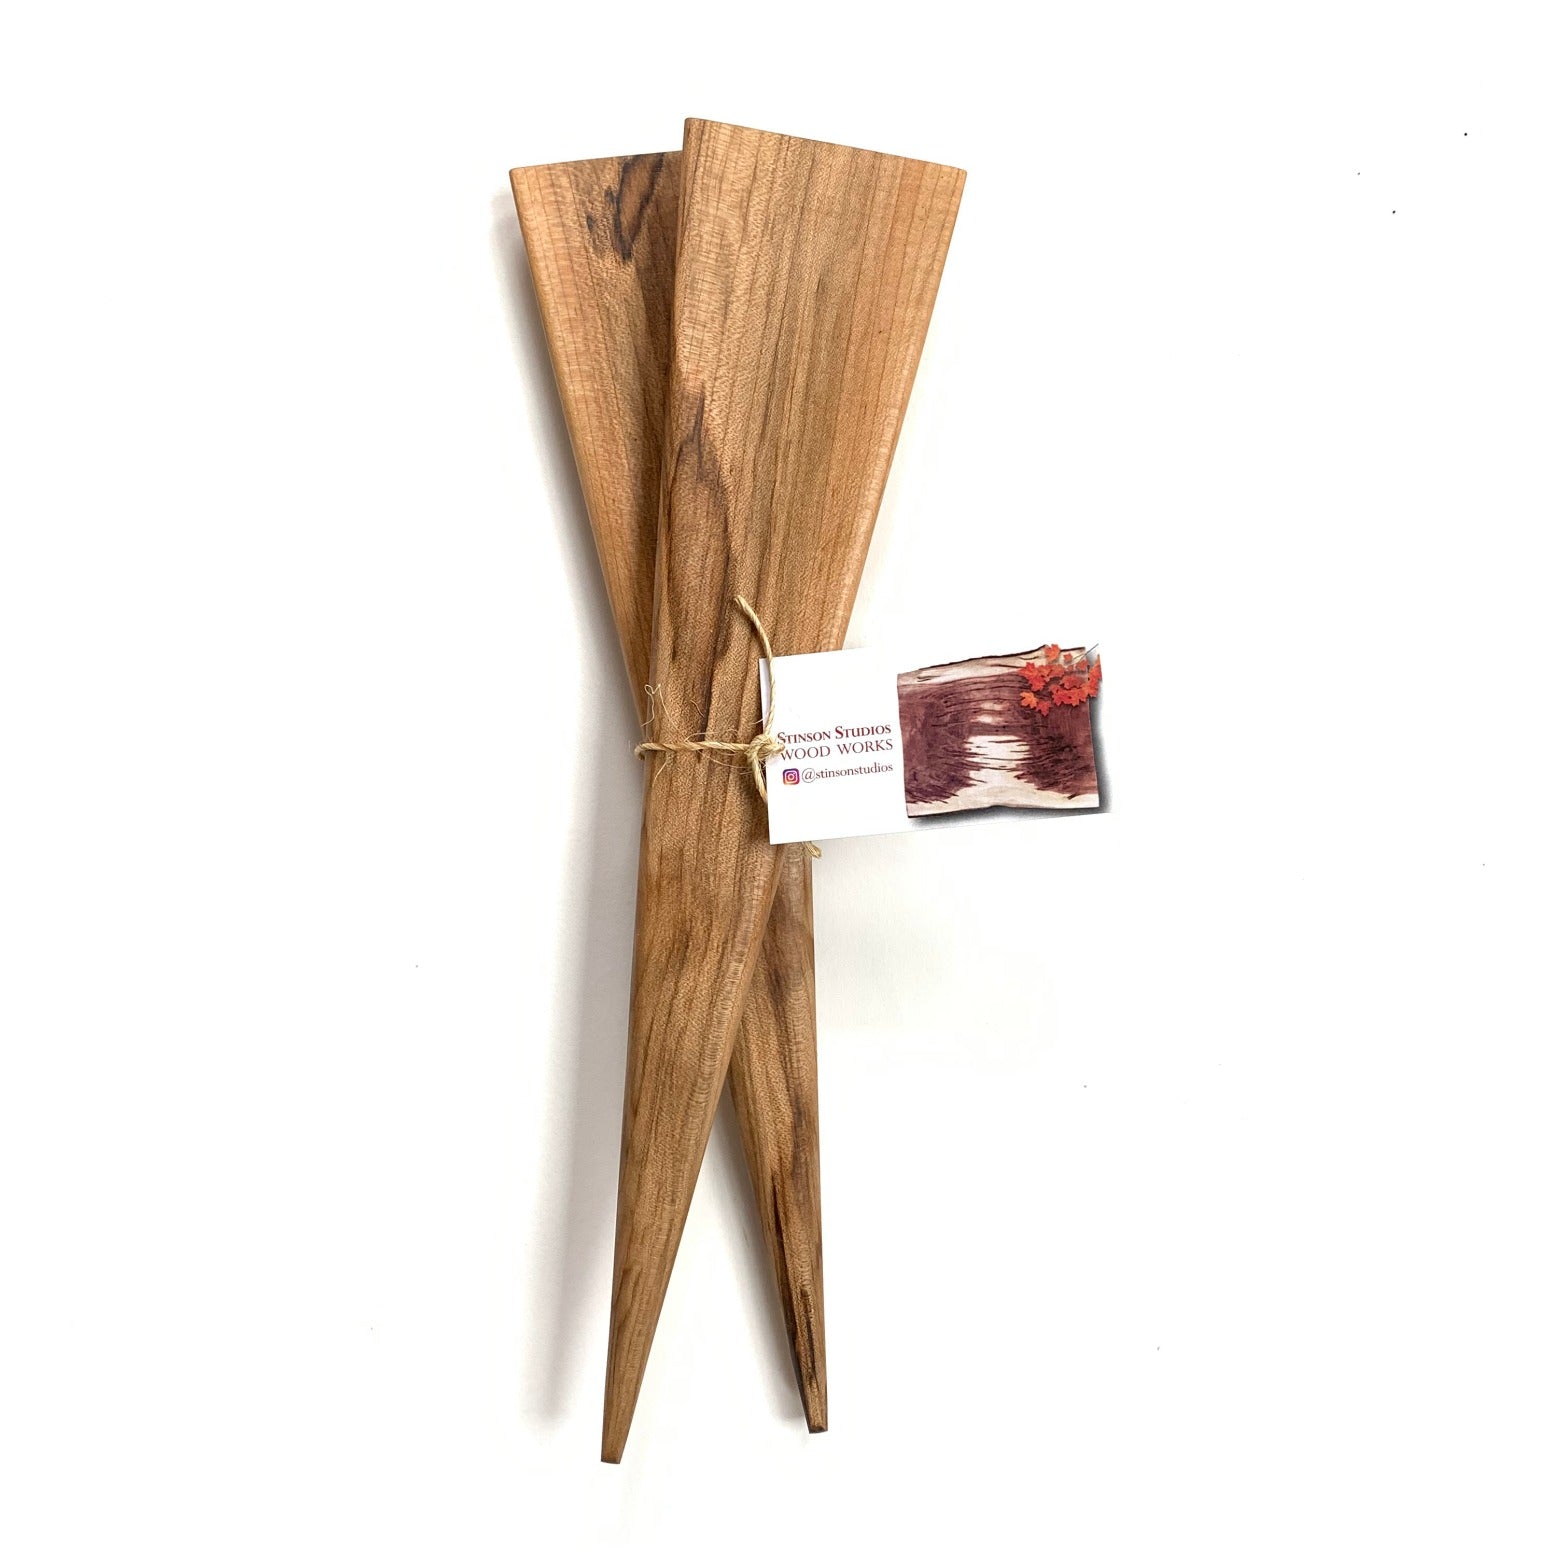 Triangular maple wood salad serving tongs made in Canada by Stinson Studios.